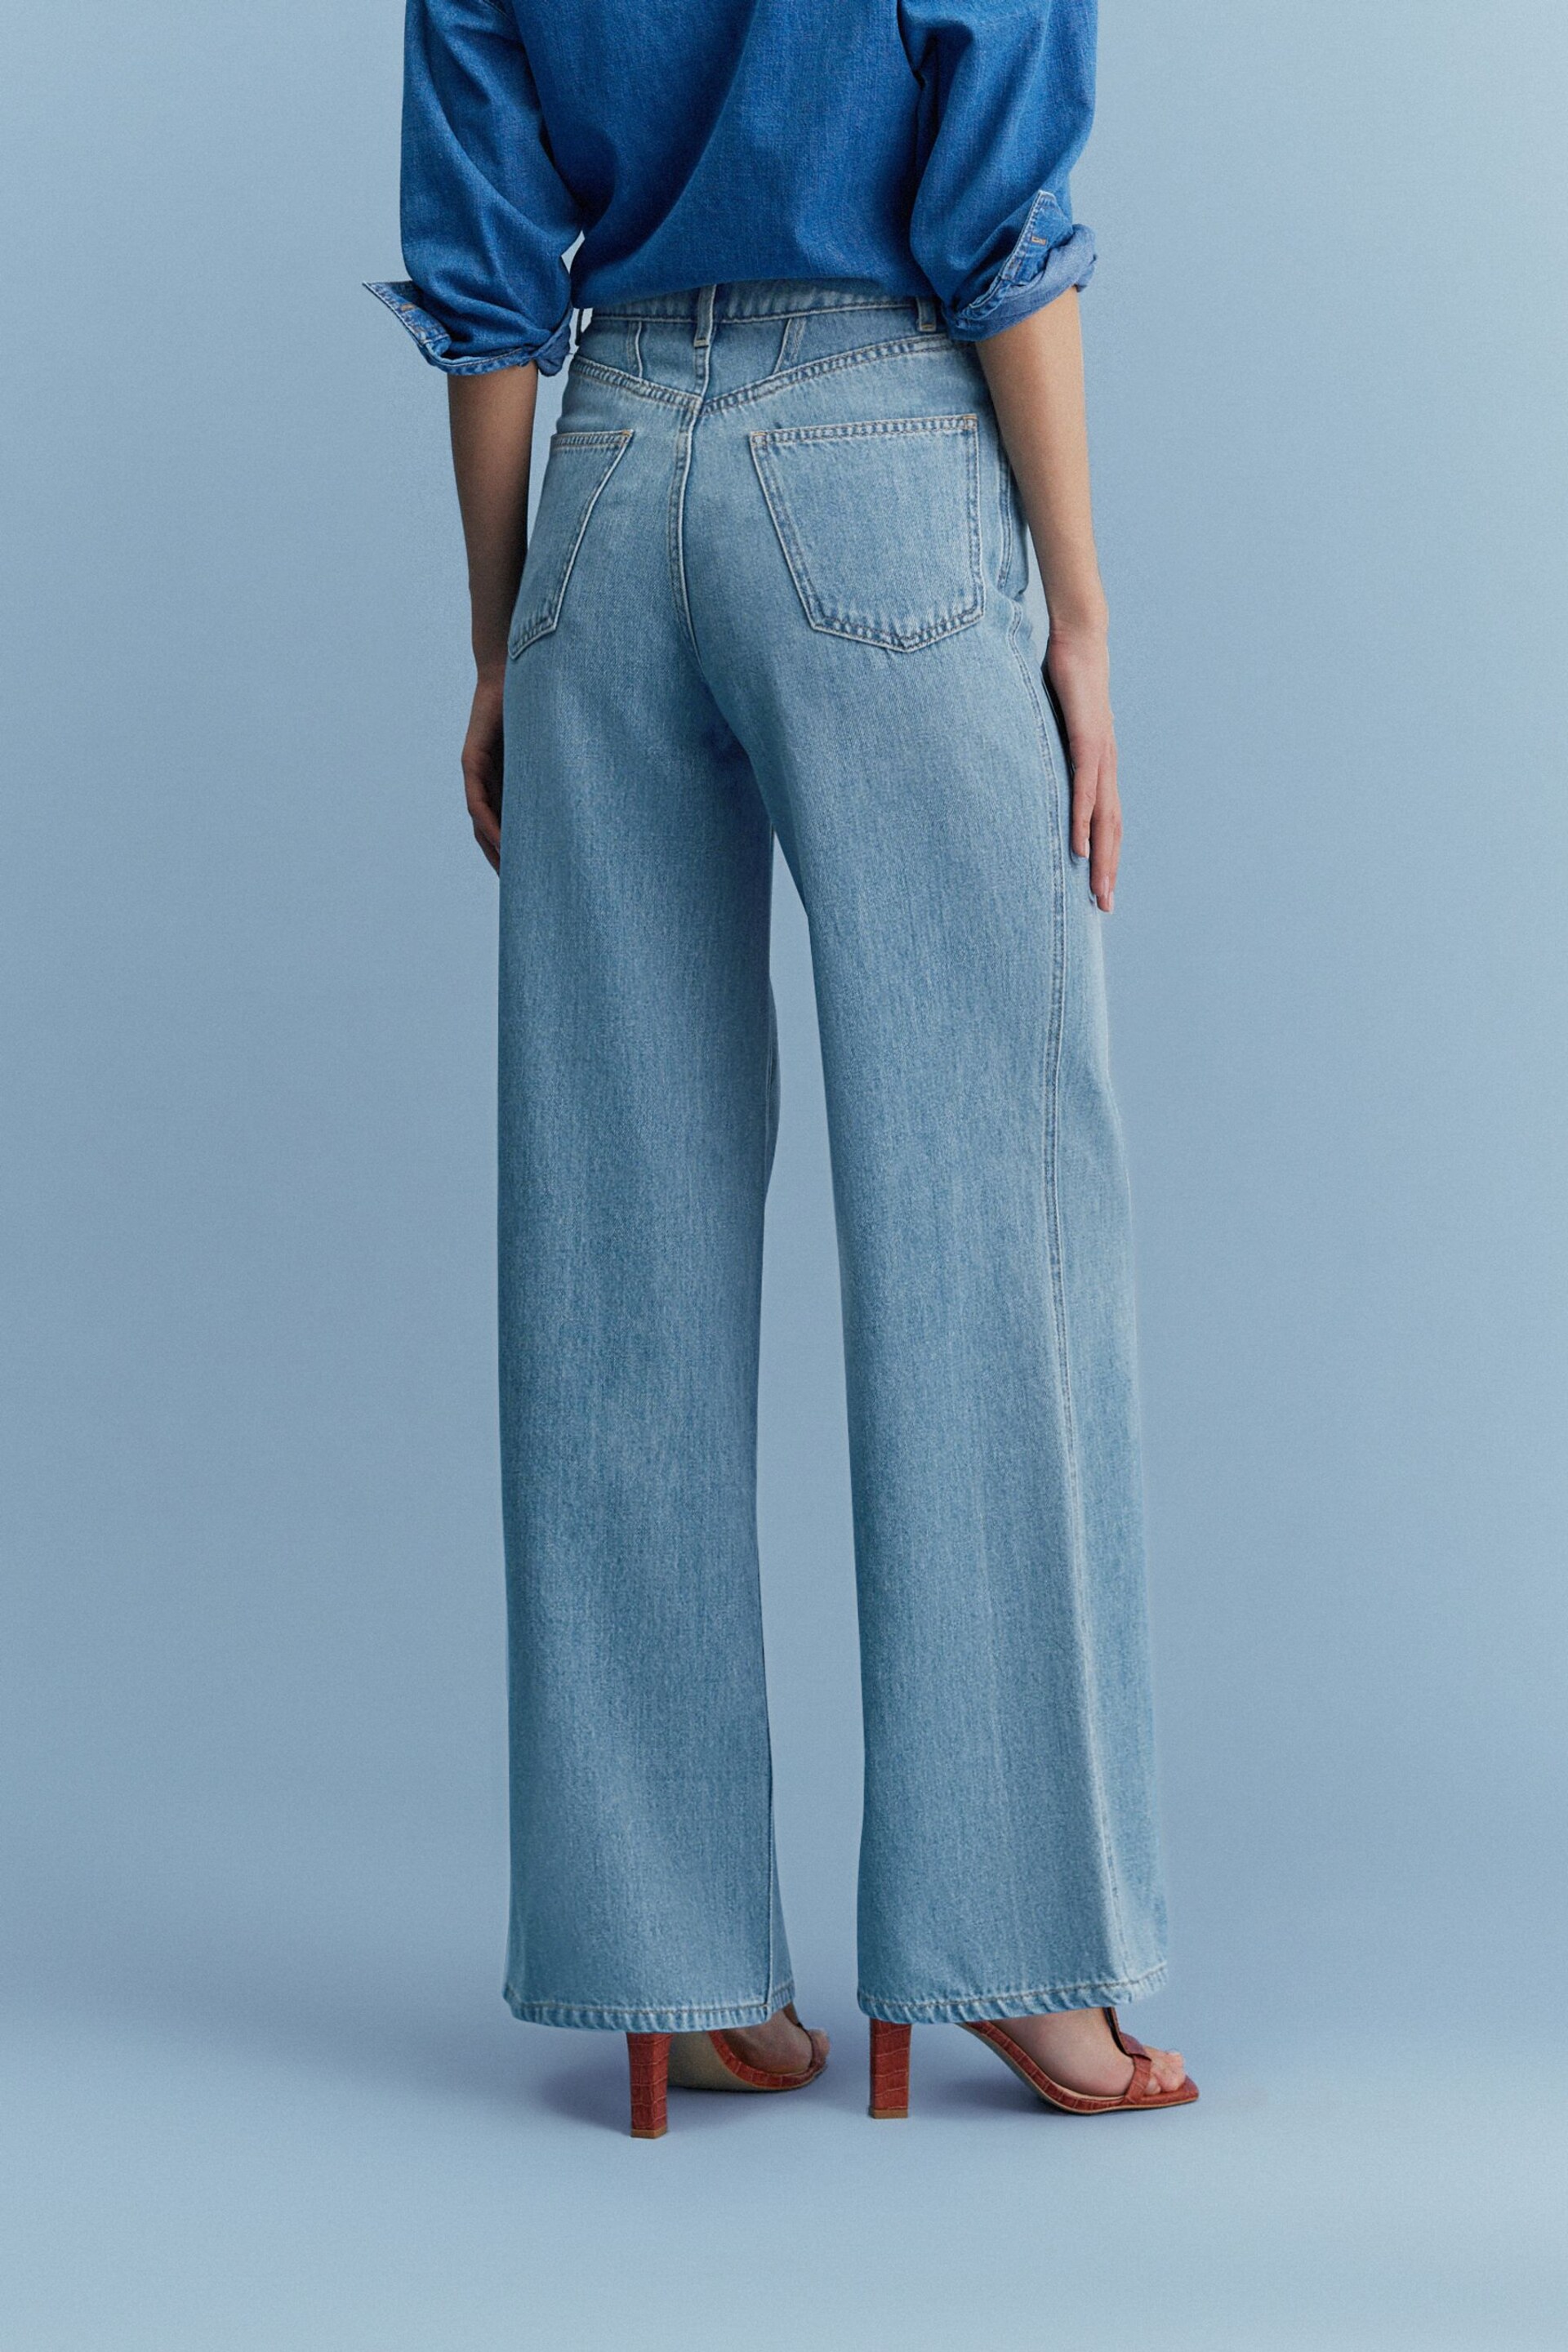 Mid Blue Loose Wide Leg Jeans - Image 4 of 7